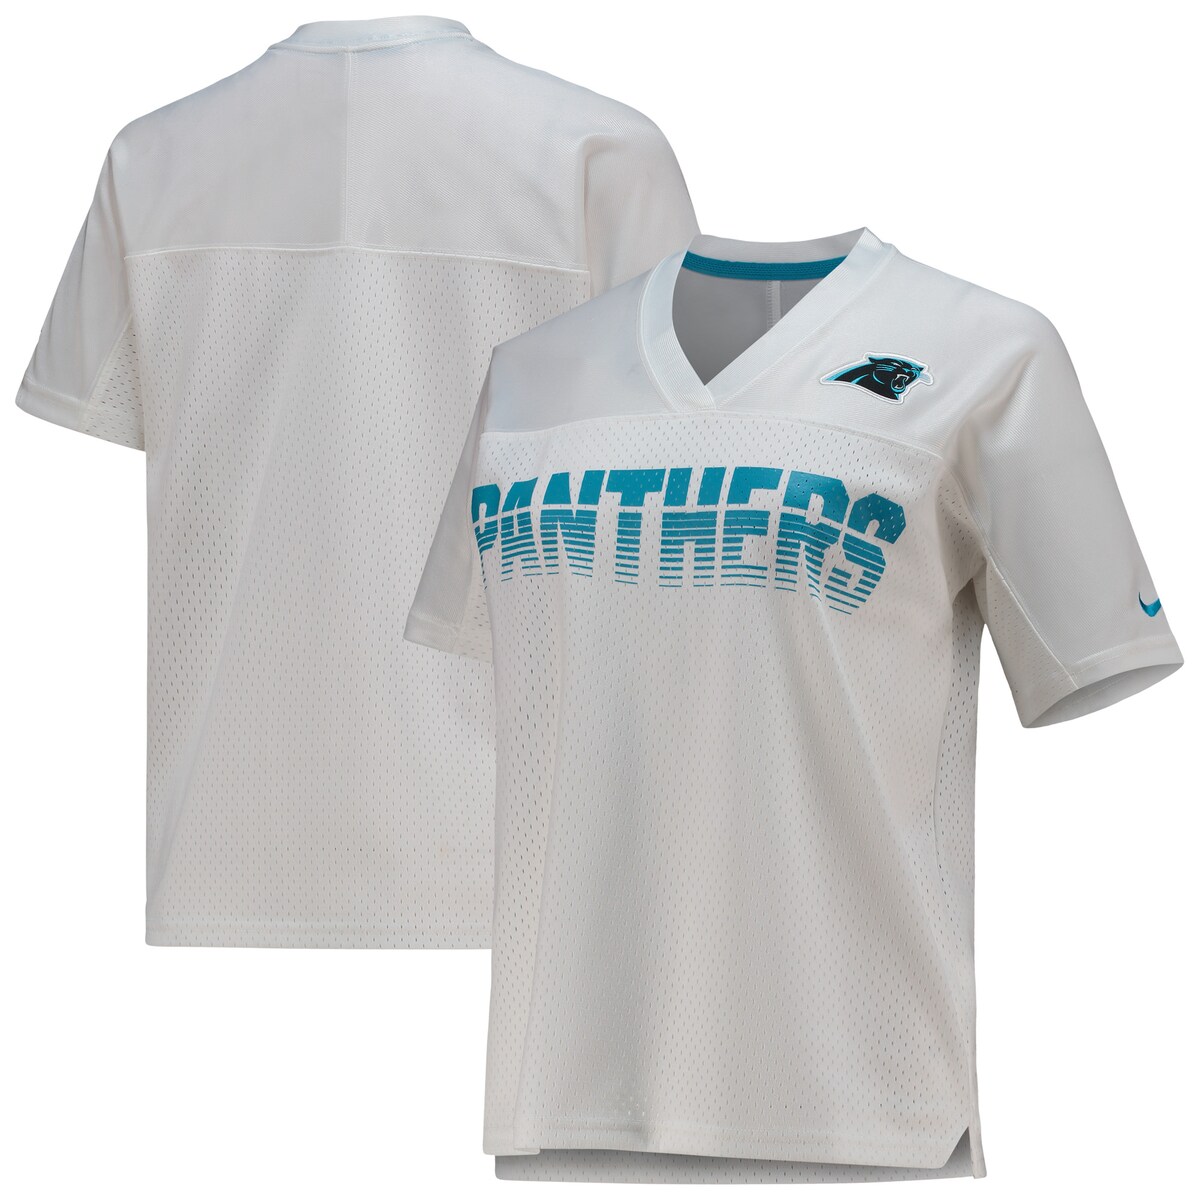 Grab yourself an official on-field look with this spirited Fan Replica jersey from Nike. It features detailed Carolina Panthers graphics and embroidery that will boldly display your love for the team. Additionally, the breathable polyester fabric, classic V-neck design and mesh detailing bring comfort to your Carolina Panthers game day get up.V-neckShort sleeveMachine wash, tumble dry lowMesh detailsScreen print graphicsOfficially licensedReplica JerseyImportedBrand: NikeSide splits at waist hemMaterial: 100% PolyesterEmbroidered fabric applique